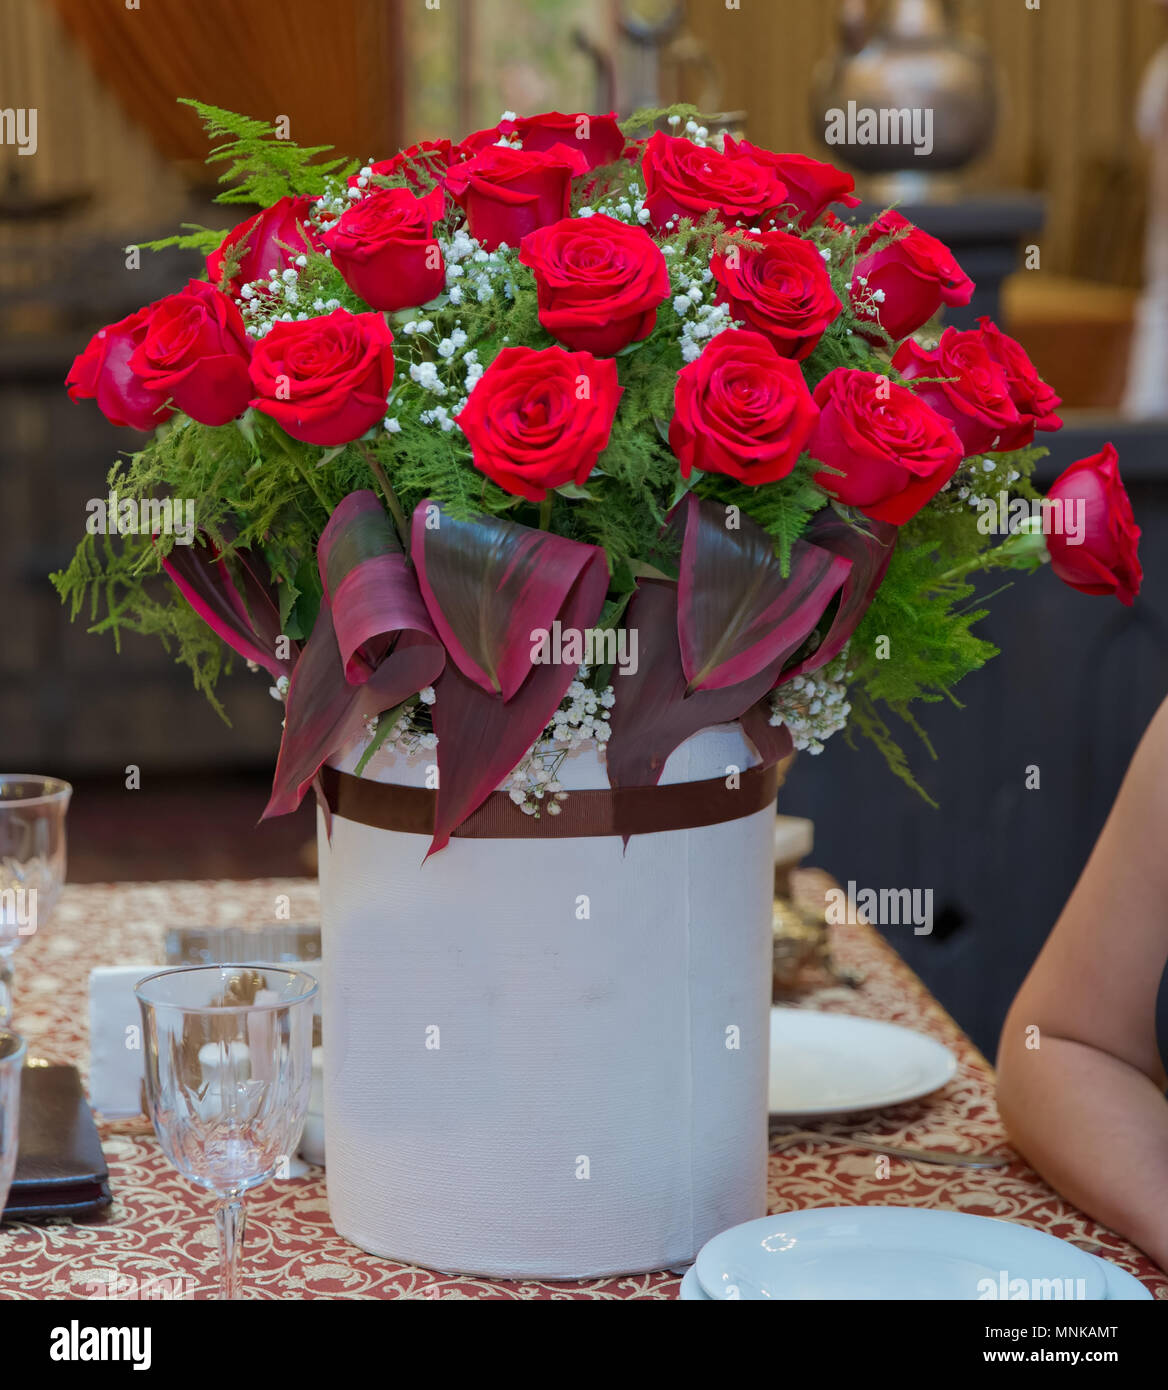 Beautiful red roses in a round box. Stock Photo